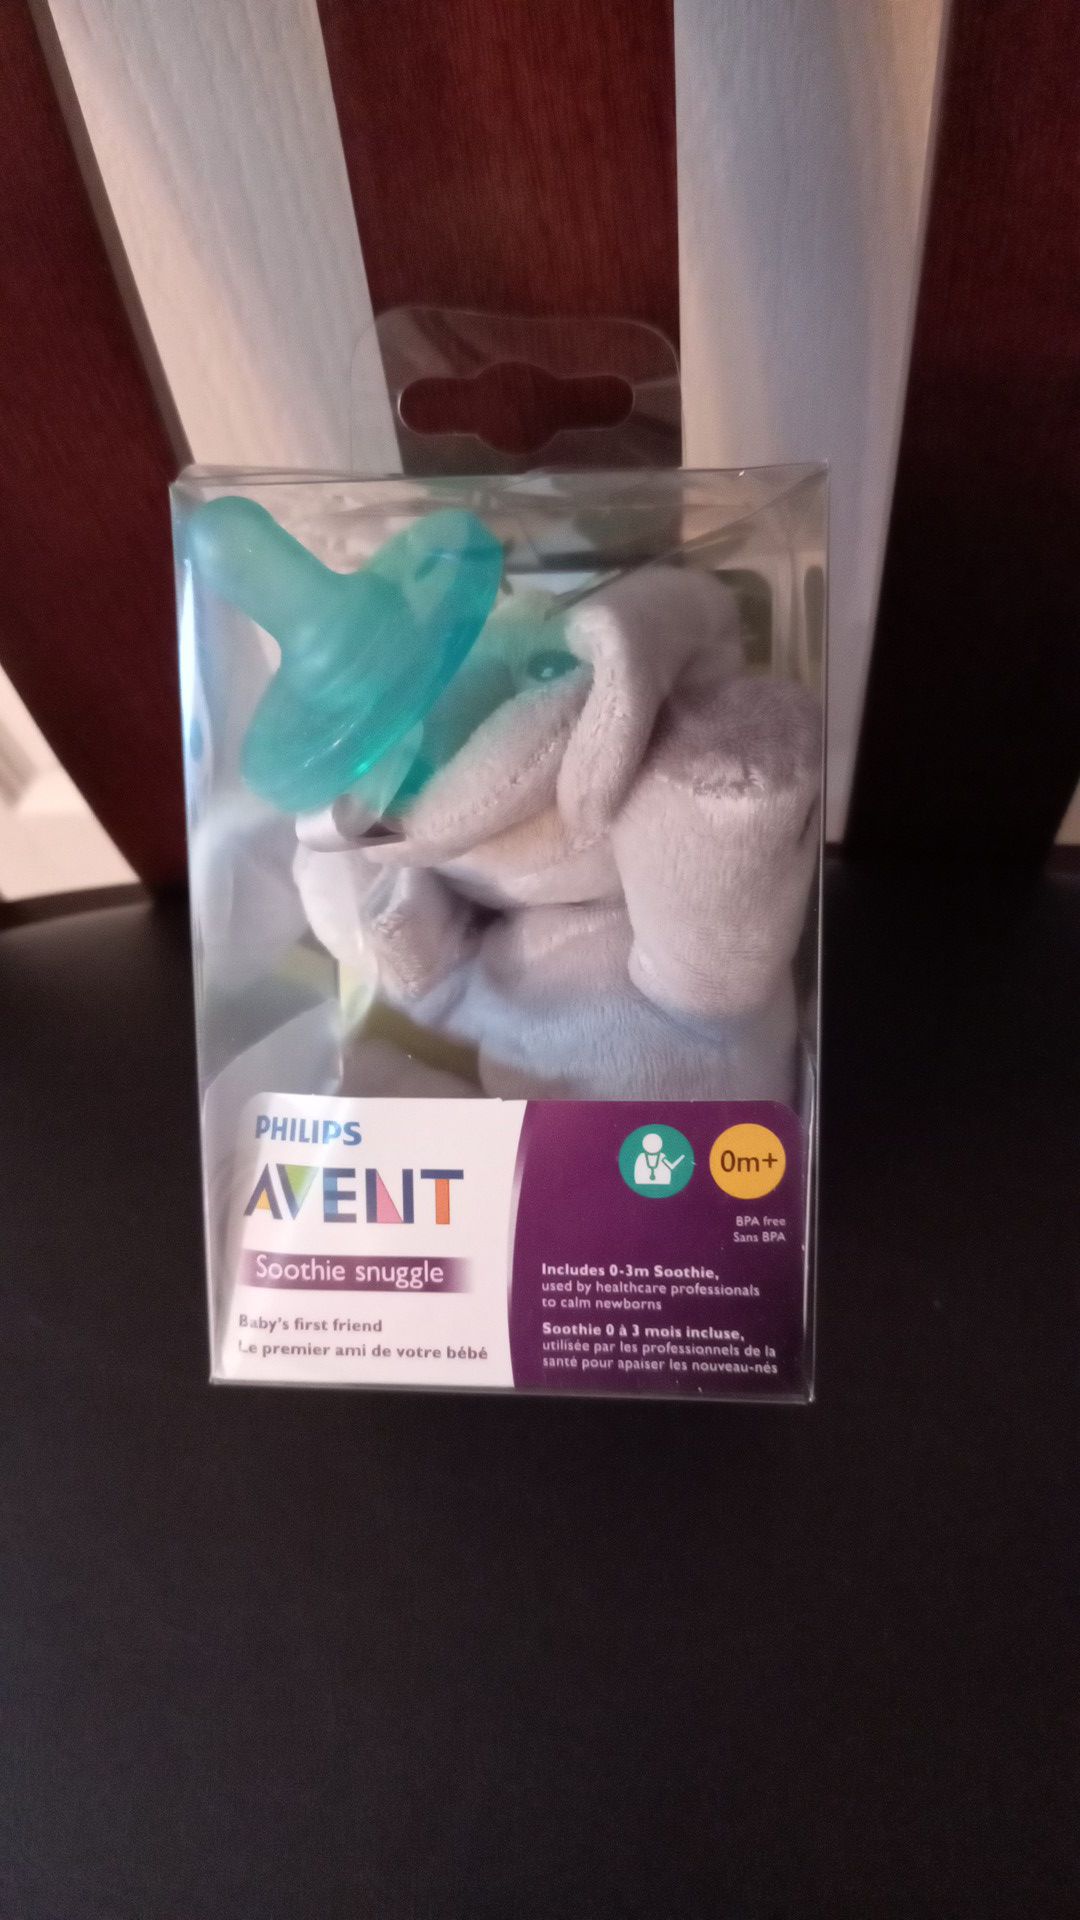 Avent Soothie snuggle elephant for ages 0+ months